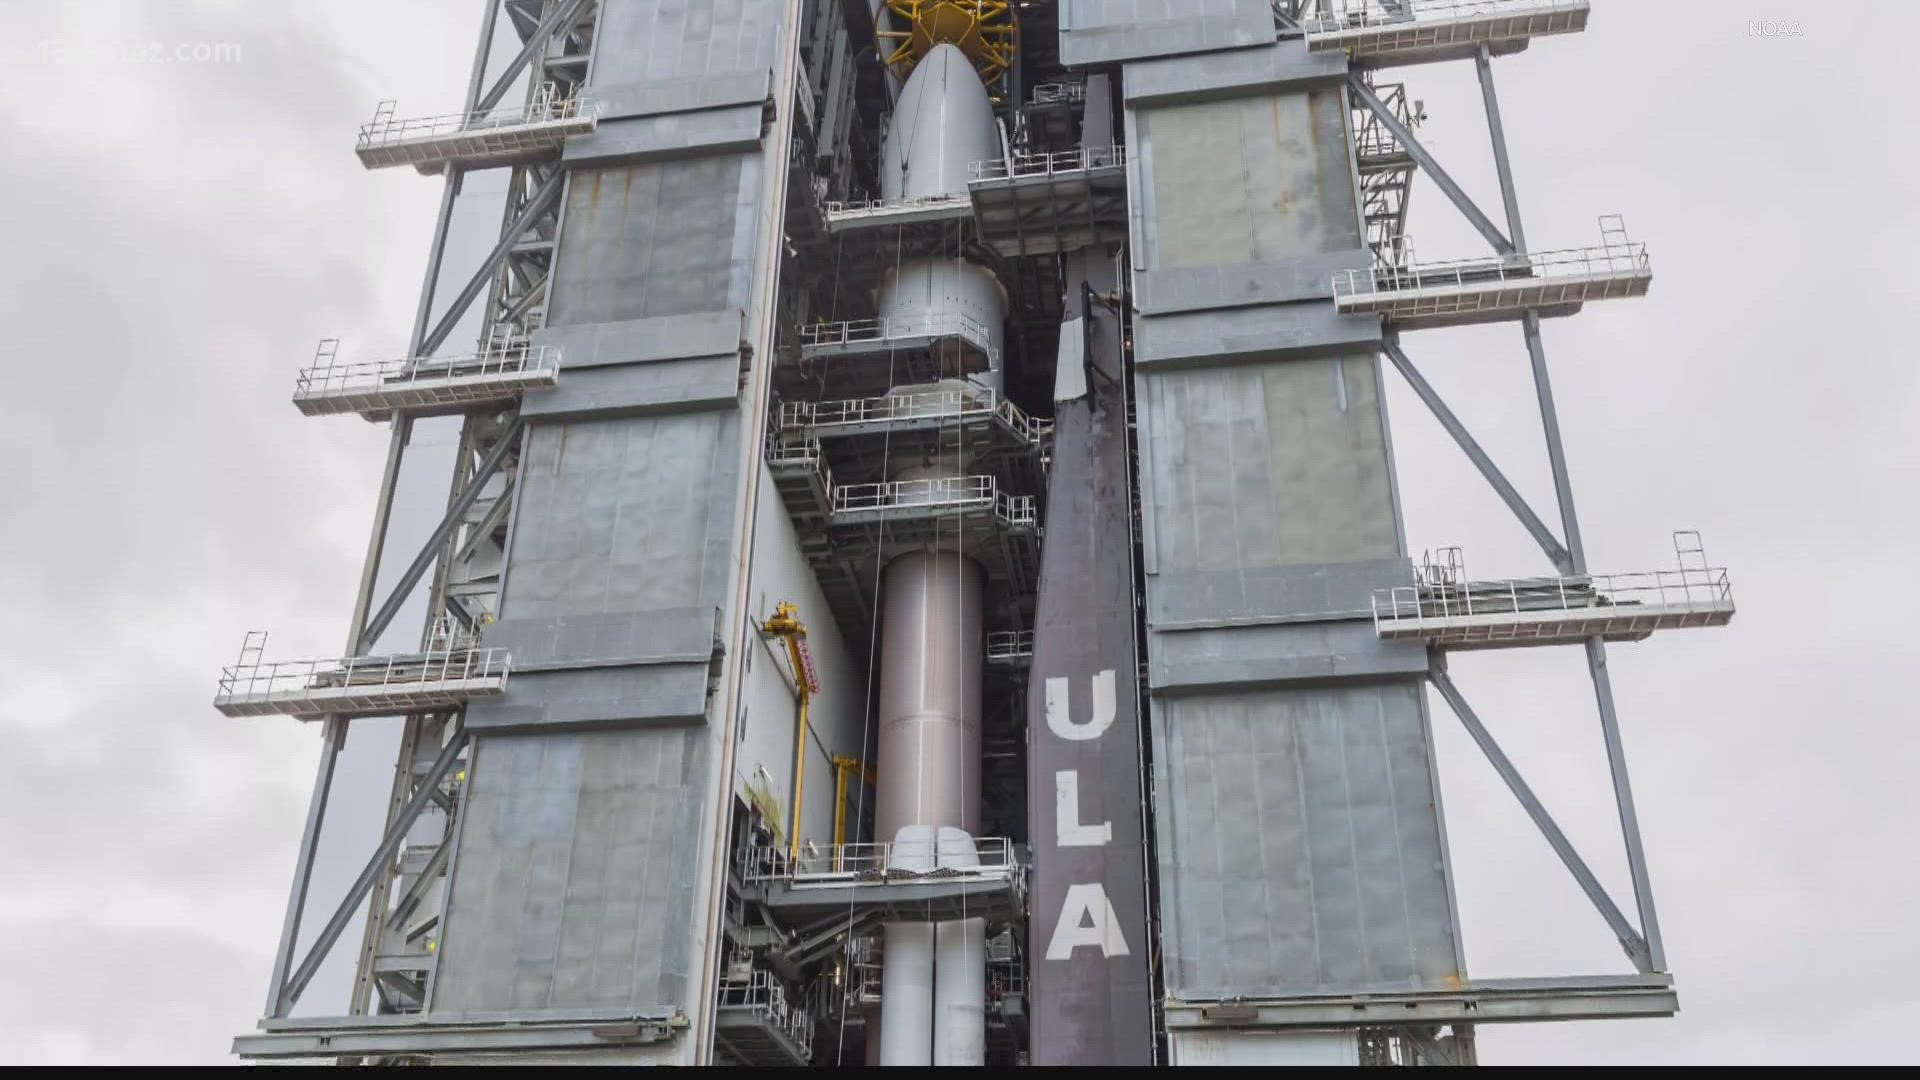 The satellite is now sitting on the launch pad and is expected to take off Tuesday afternoon.